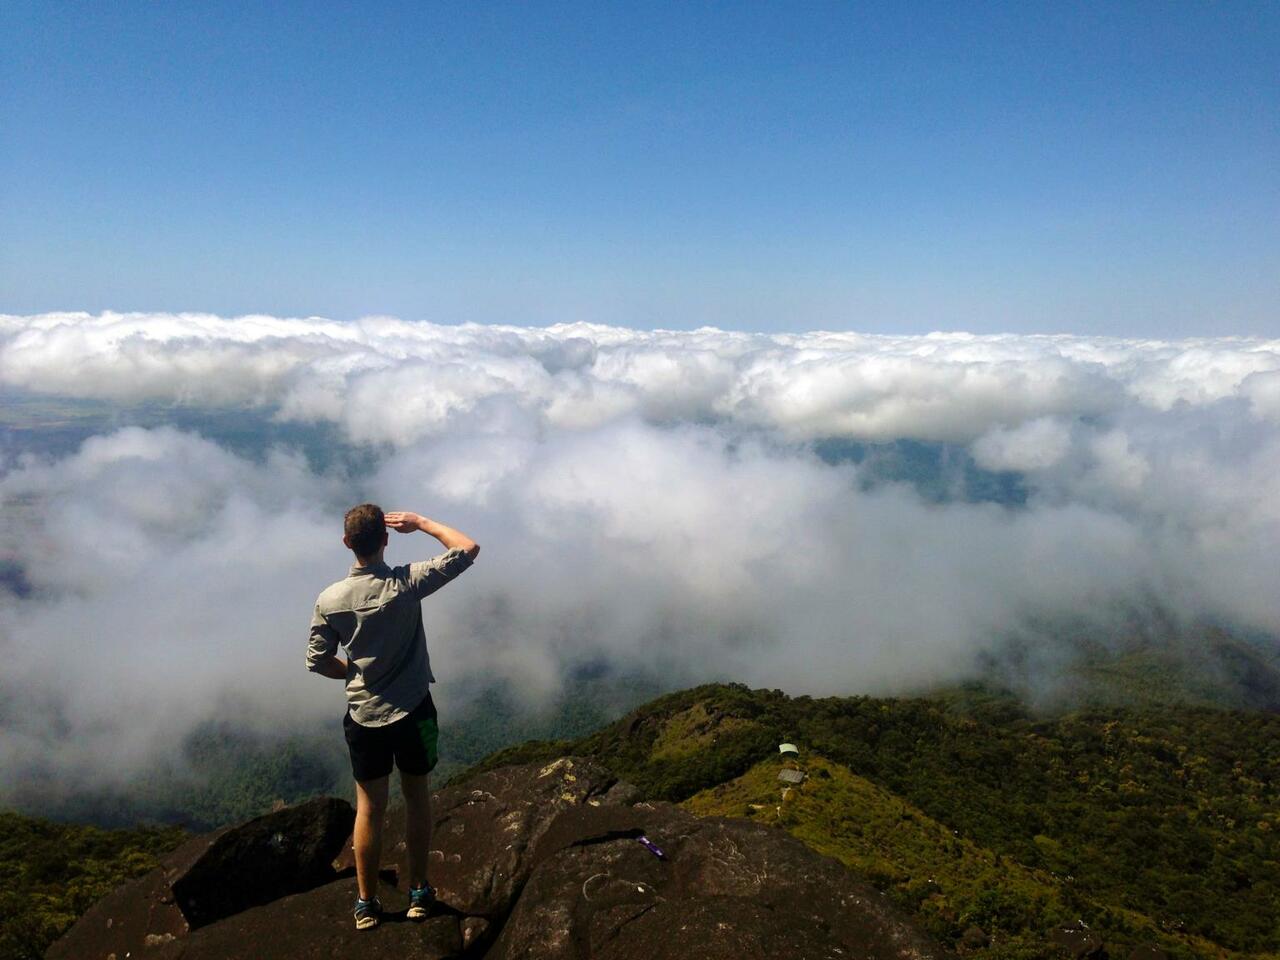 "I got to the top and just stared in awe across the #clouds" #nature #hiking #photography https://t.co/h6BlUdVaTh